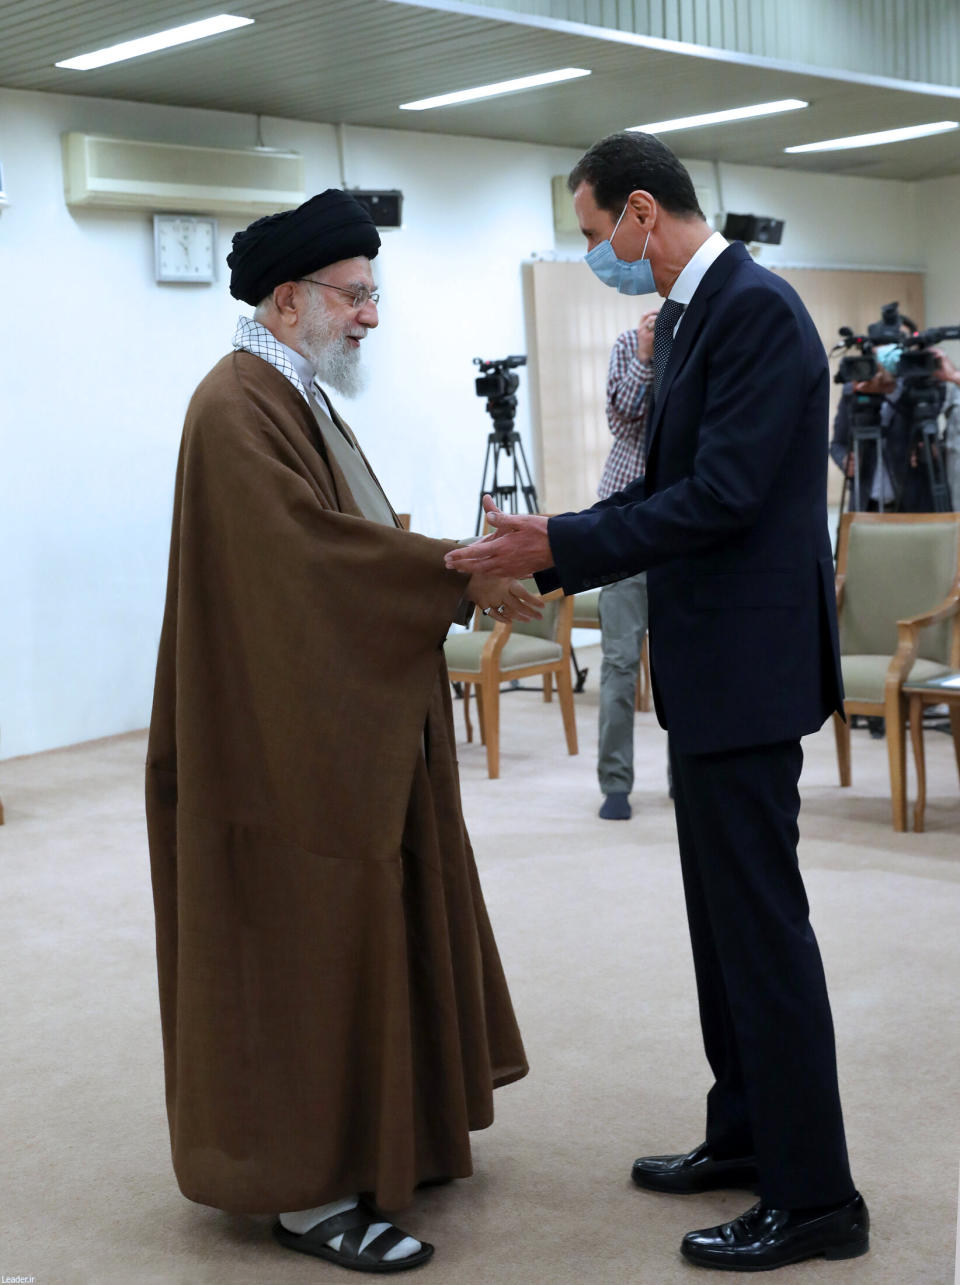 In this picture released by the official website of the office of the Iranian supreme leader, Supreme Leader Ayatollah Ali Khamenei, left, and Syrian President Bashar Assad shake hands at the start of their meeting, in Tehran, Iran, Sunday, May 8, 2022. Nour News, close to Iran's security apparatus, said in the Sunday report that Assad met Ayatollah Khamenei and President Ebrahim Raisi earlier in the day. (Office of the Iranian Supreme Leader via AP)